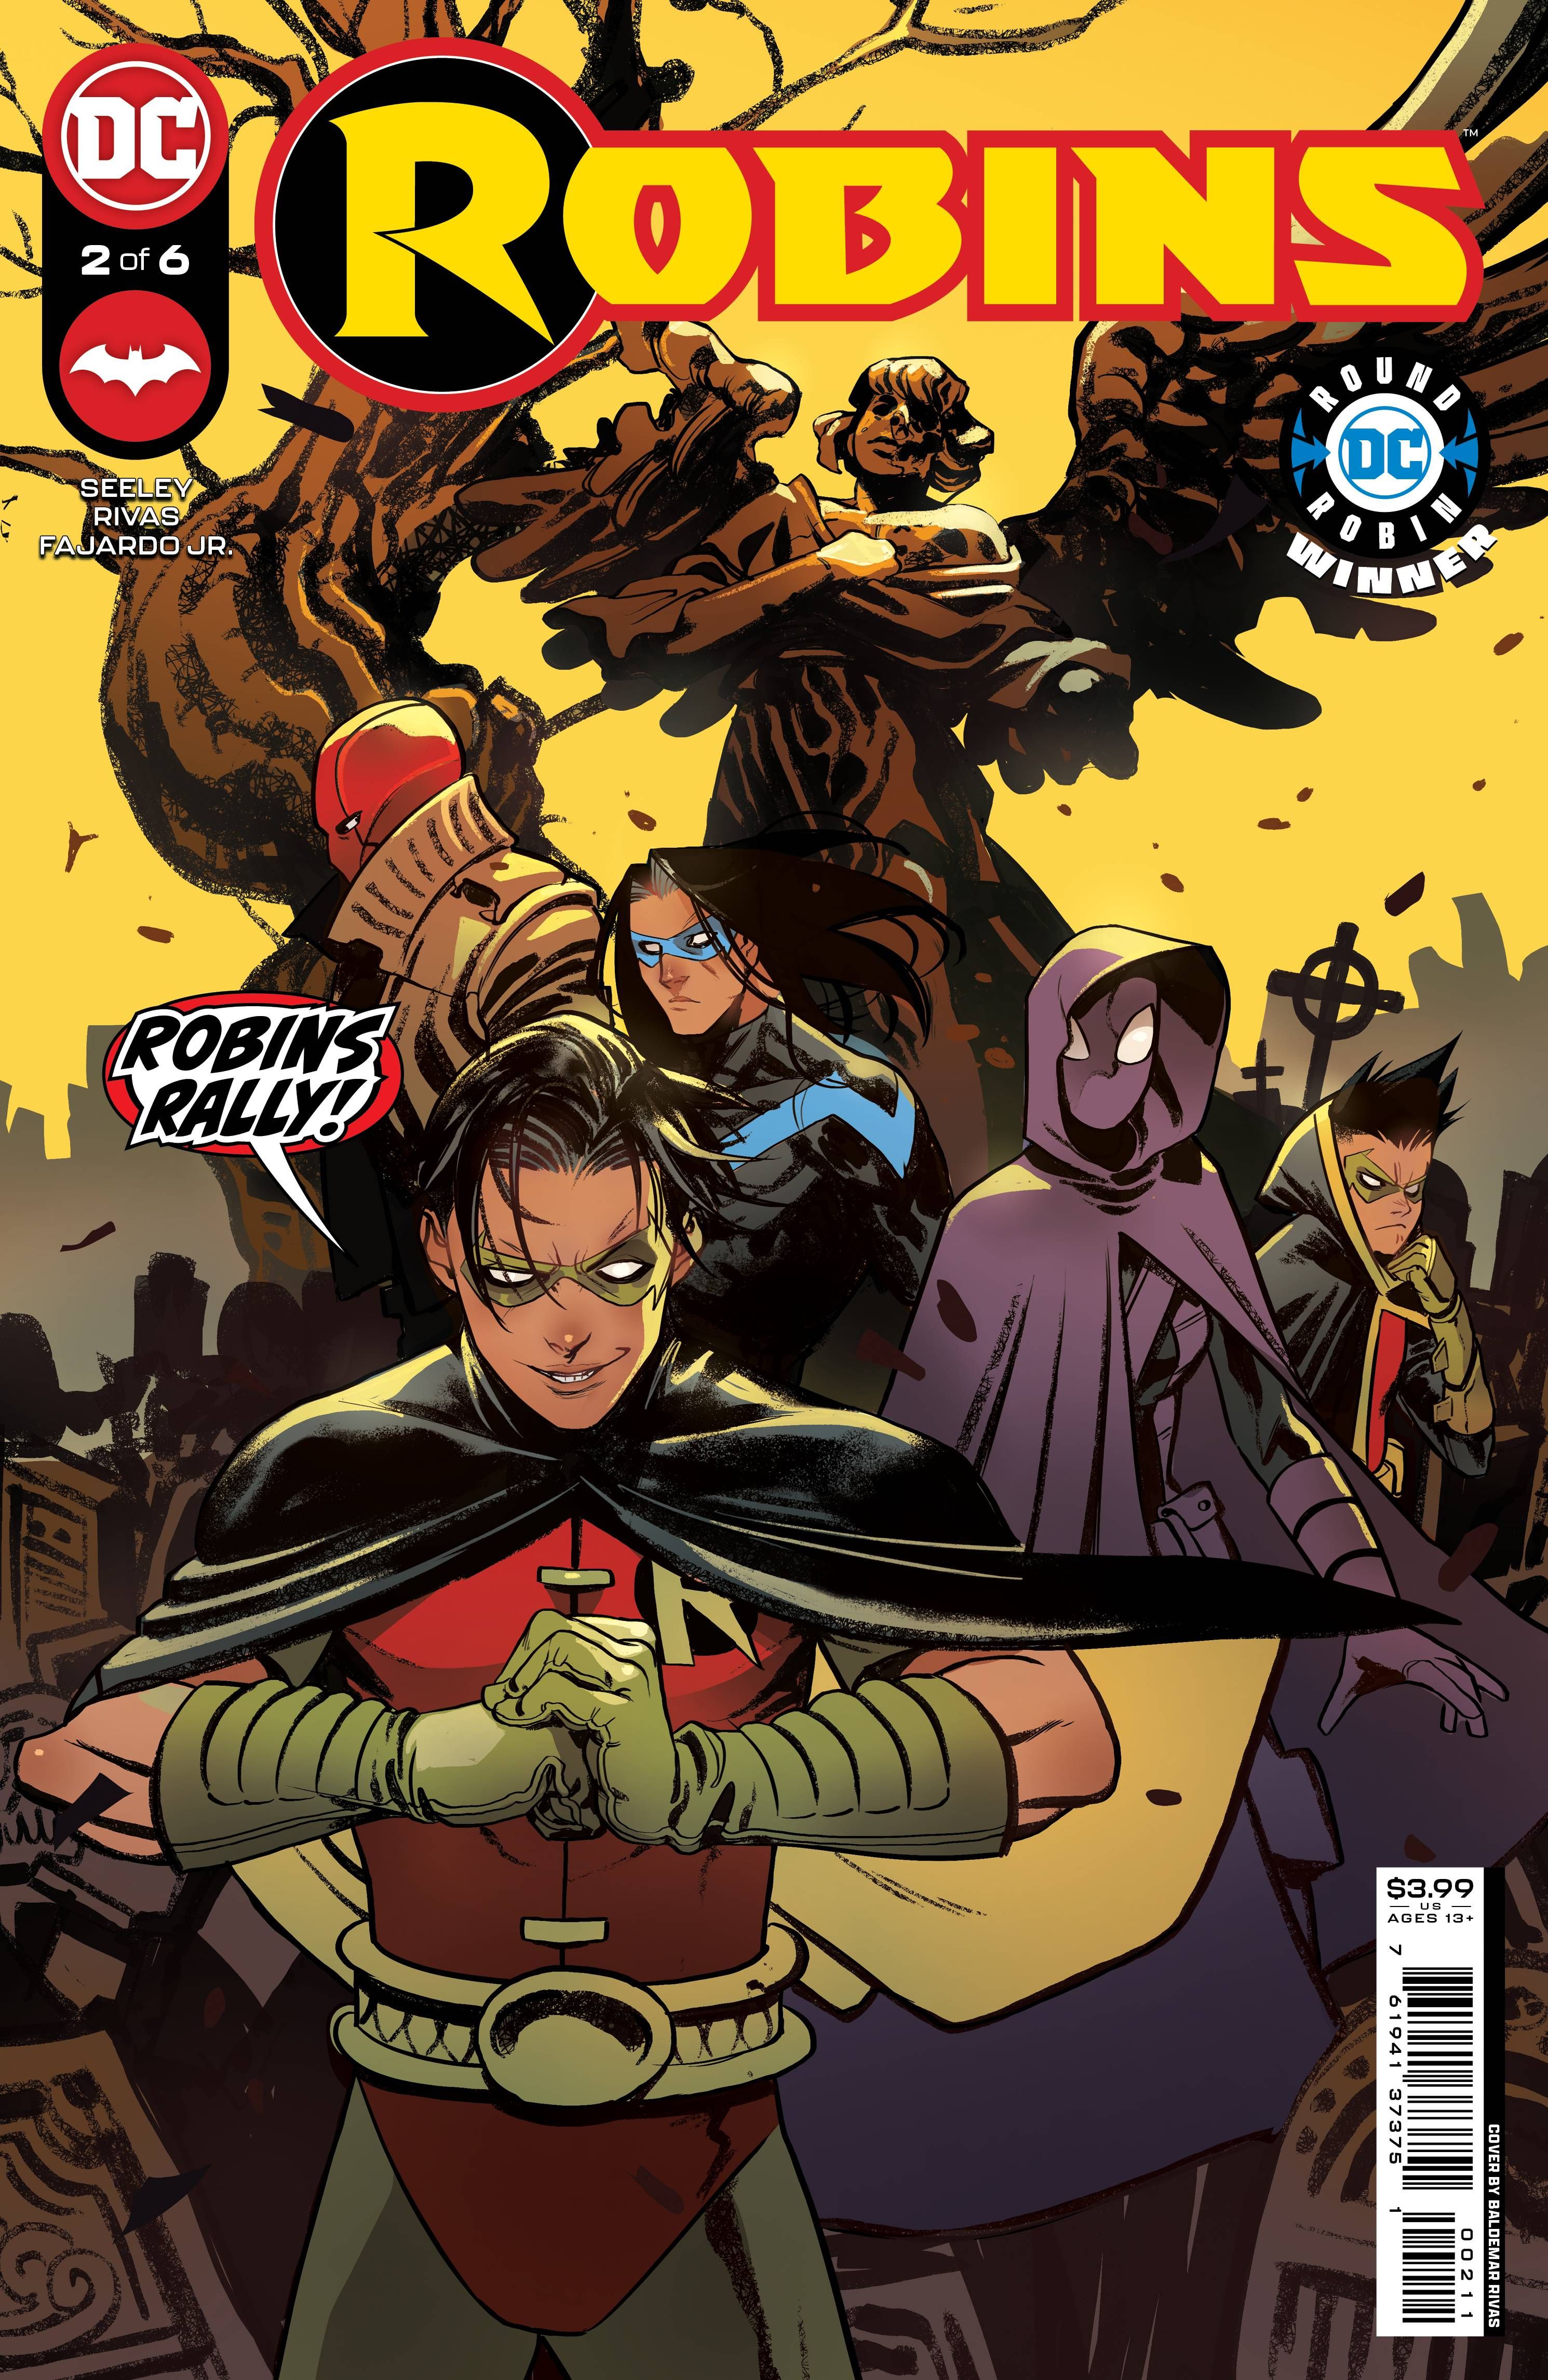 Robins 2 Main Cover: Robin Tim Drake, Spoiler Stephanie Brown, Nightwing Dick Grayson, Red Hood Jason Todd, and Robin Damian Wayne pose together in a cemetery.